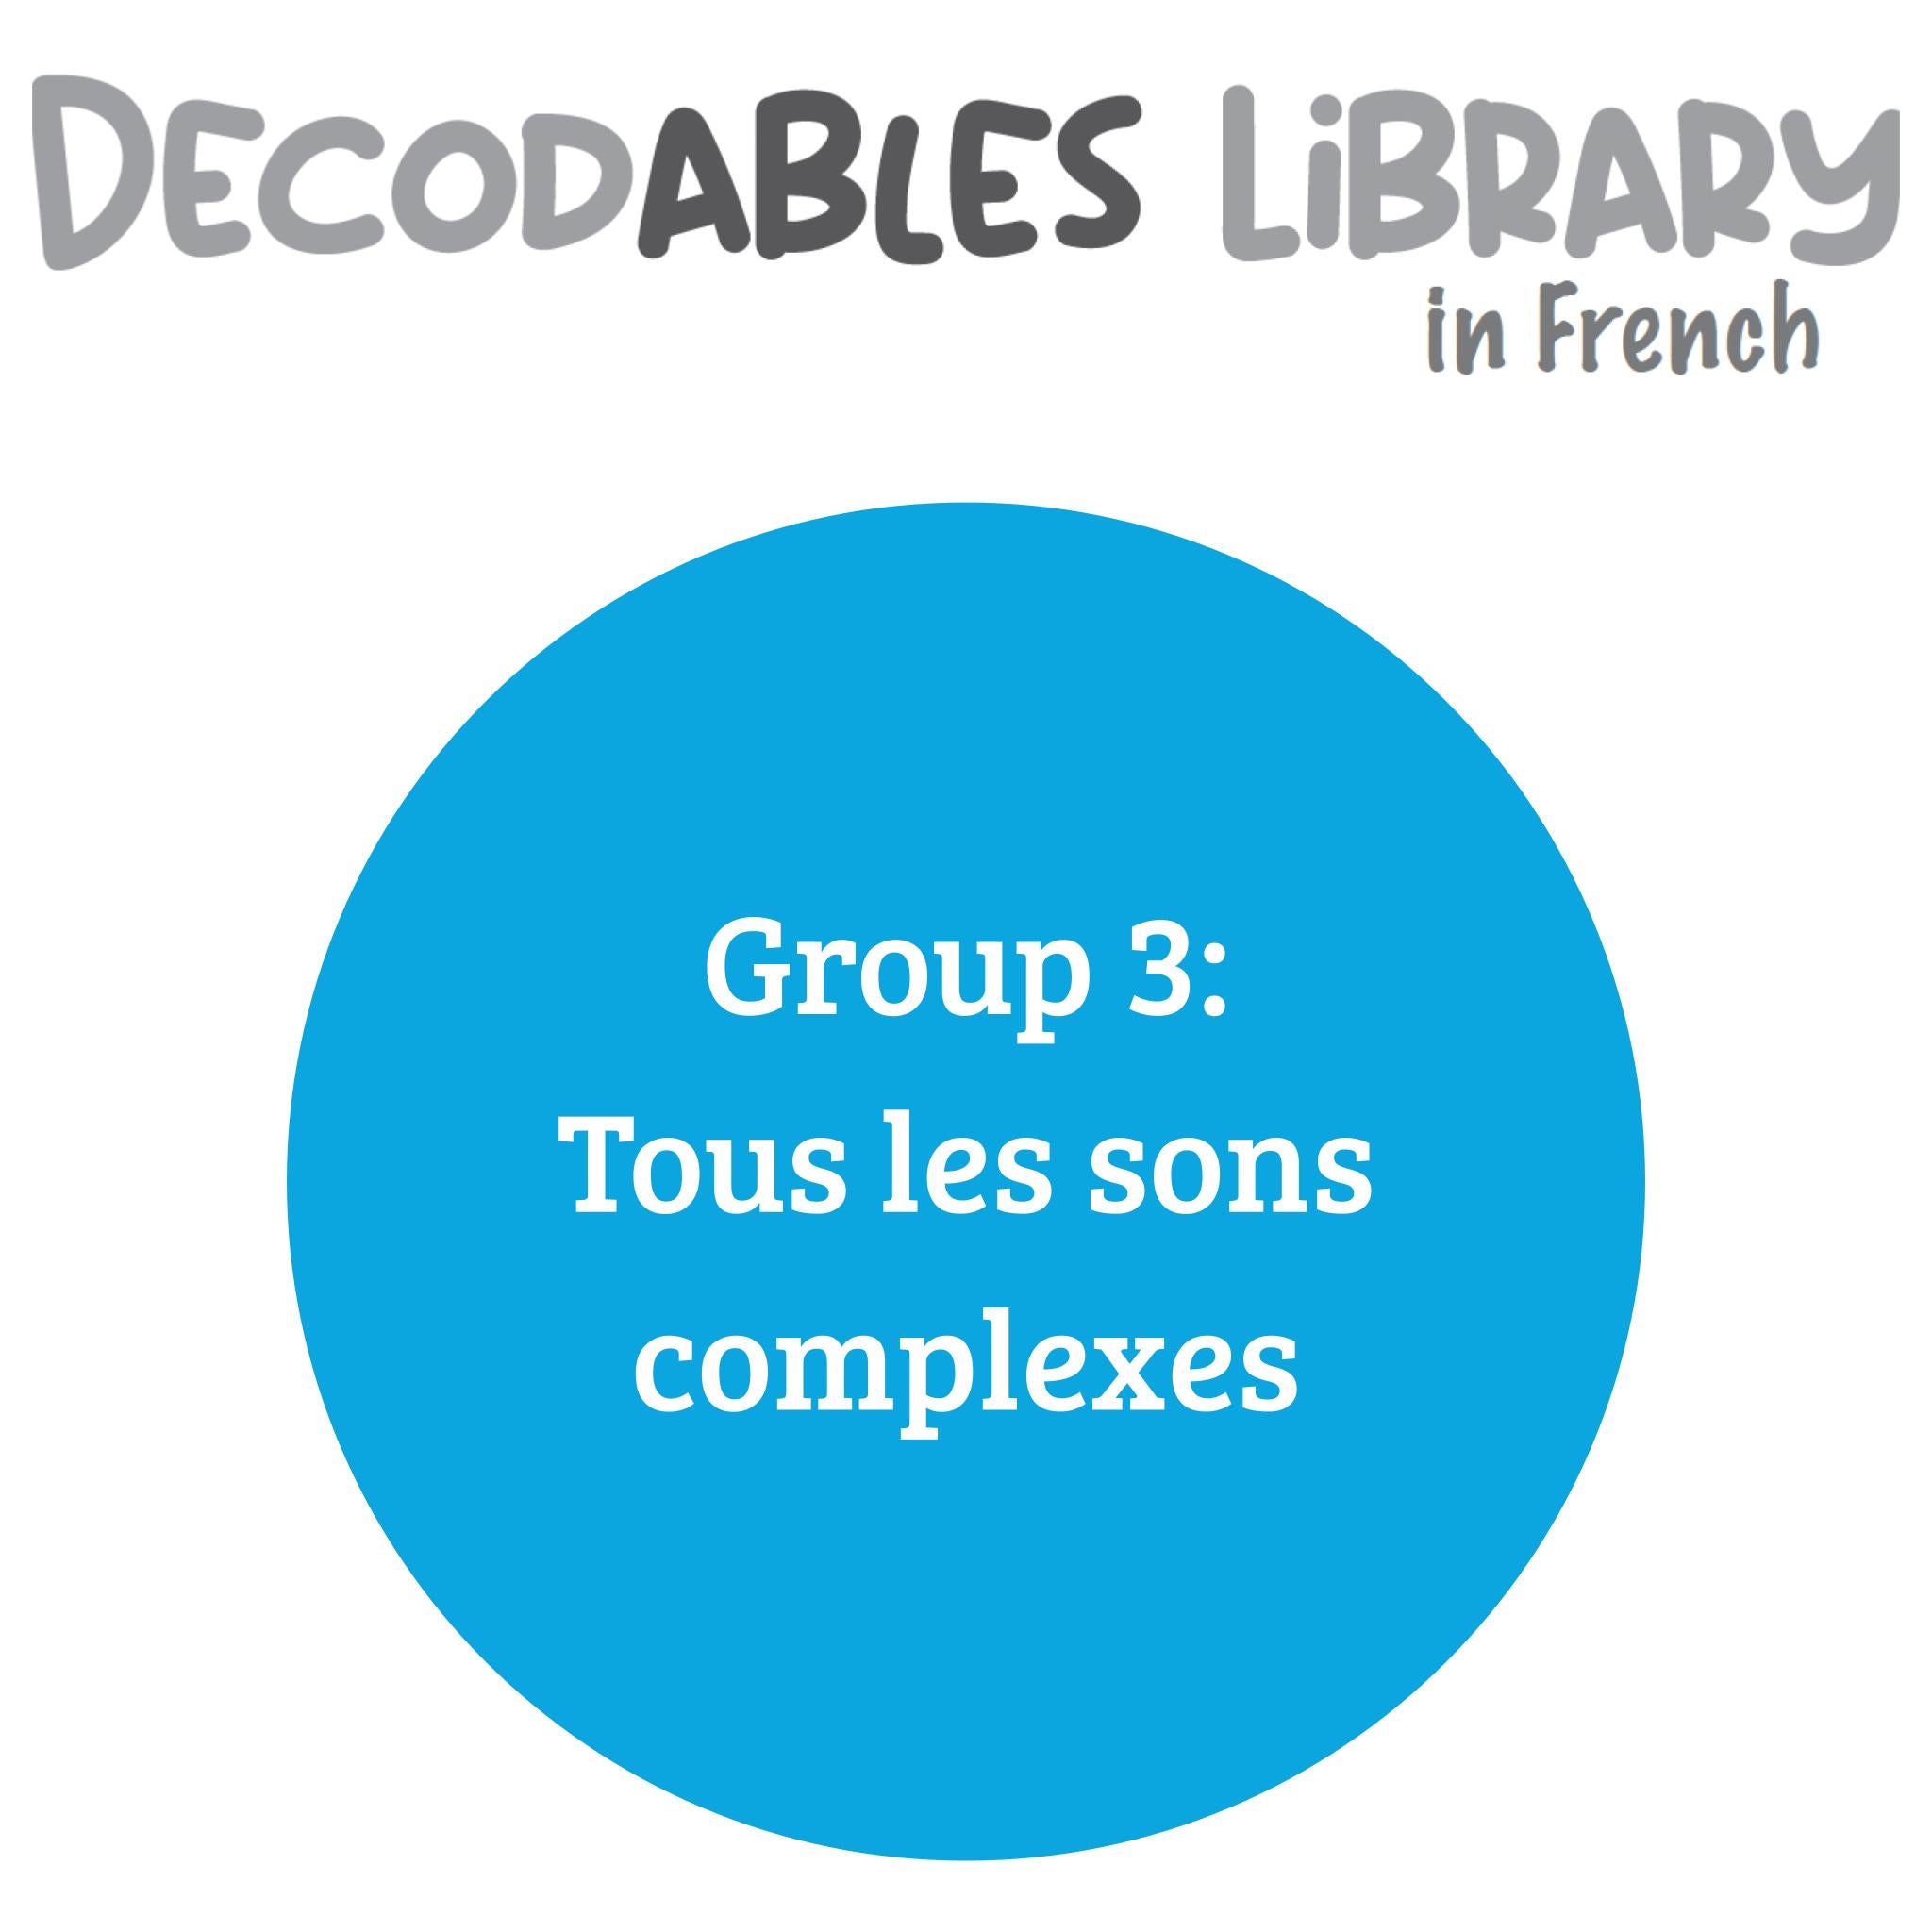 French Decodables Library - Group 3 - Tous les sons complexes (set of 10 titles)